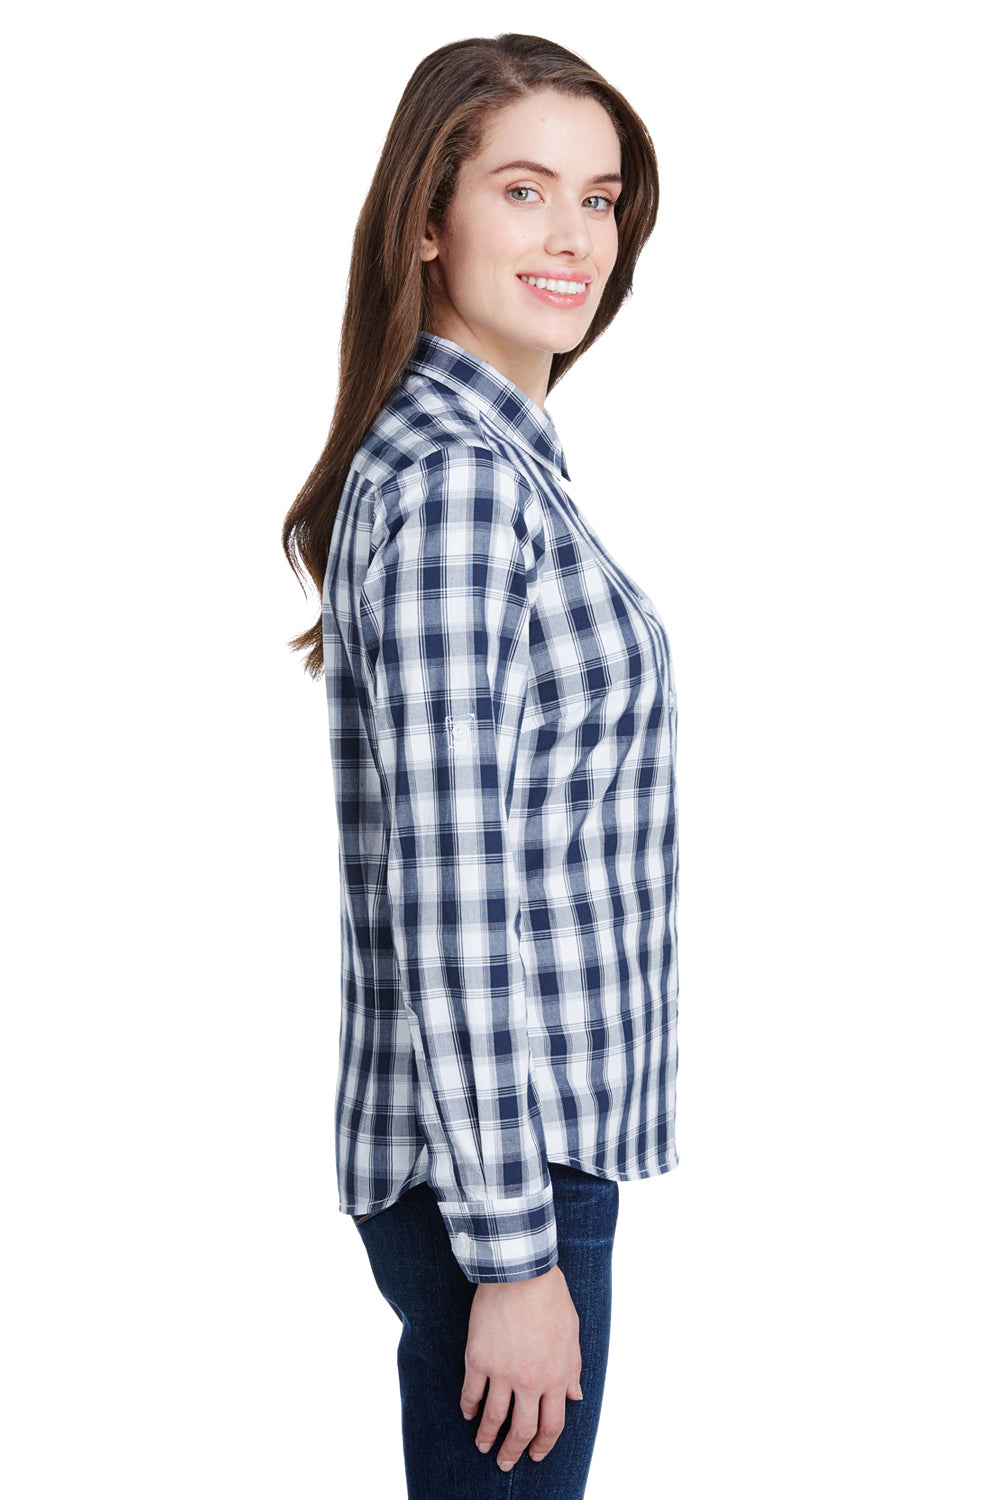 Artisan Collection RP350 Womens Mulligan Check Long Sleeve Button Down Shirt White/Navy Blue Model Side